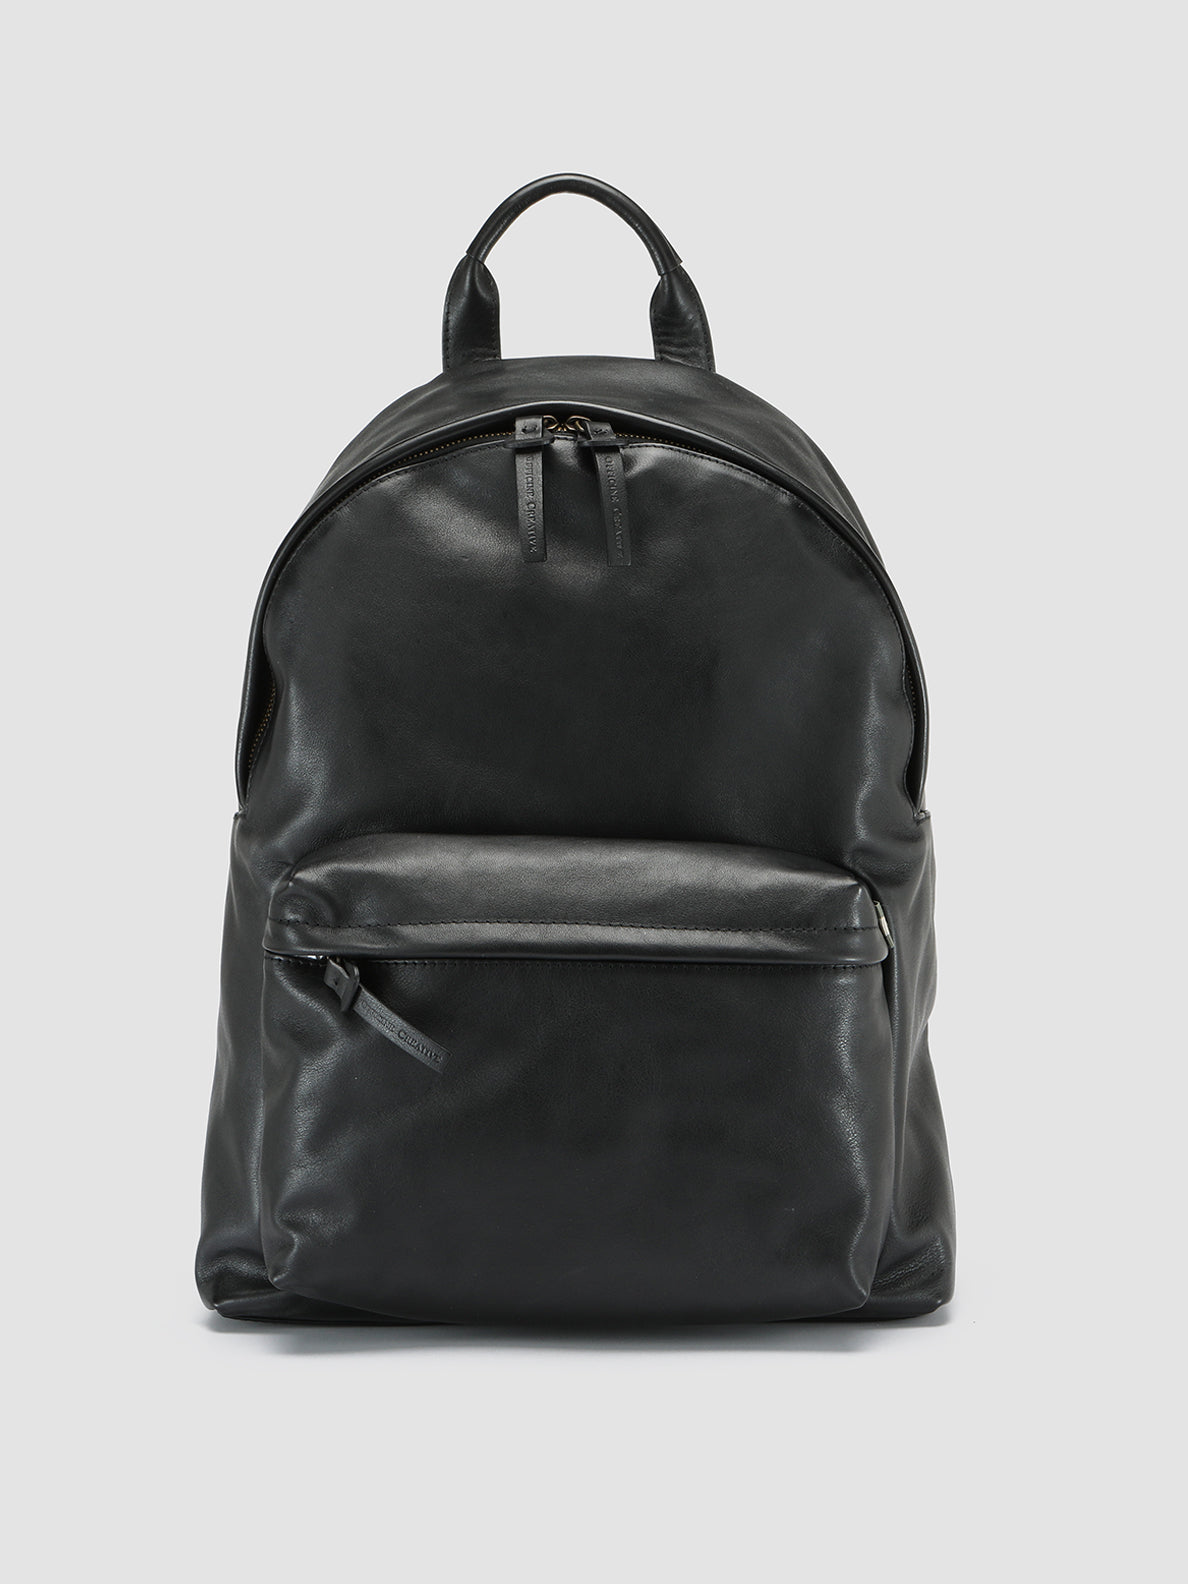 Leather Backpacks for Women - Il Bisonte | Il Bisonte